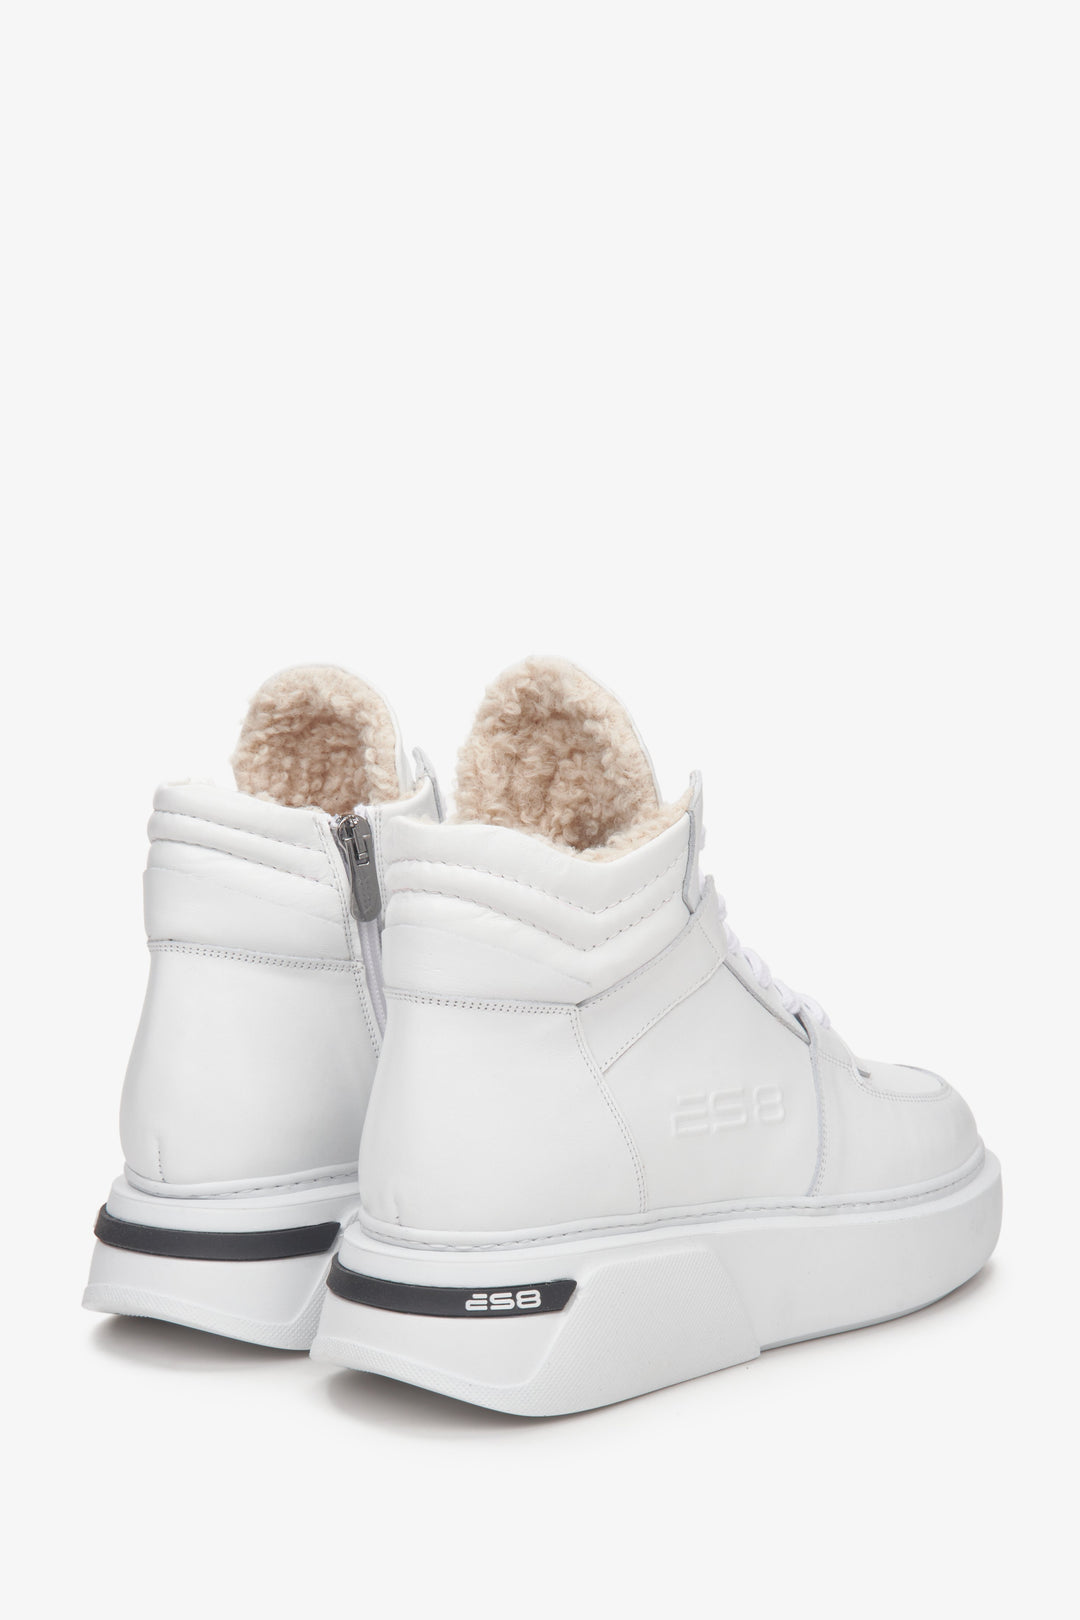 Women's high-top winter sneakers in white suede and leather - close-up on the heel and side profile of the model.